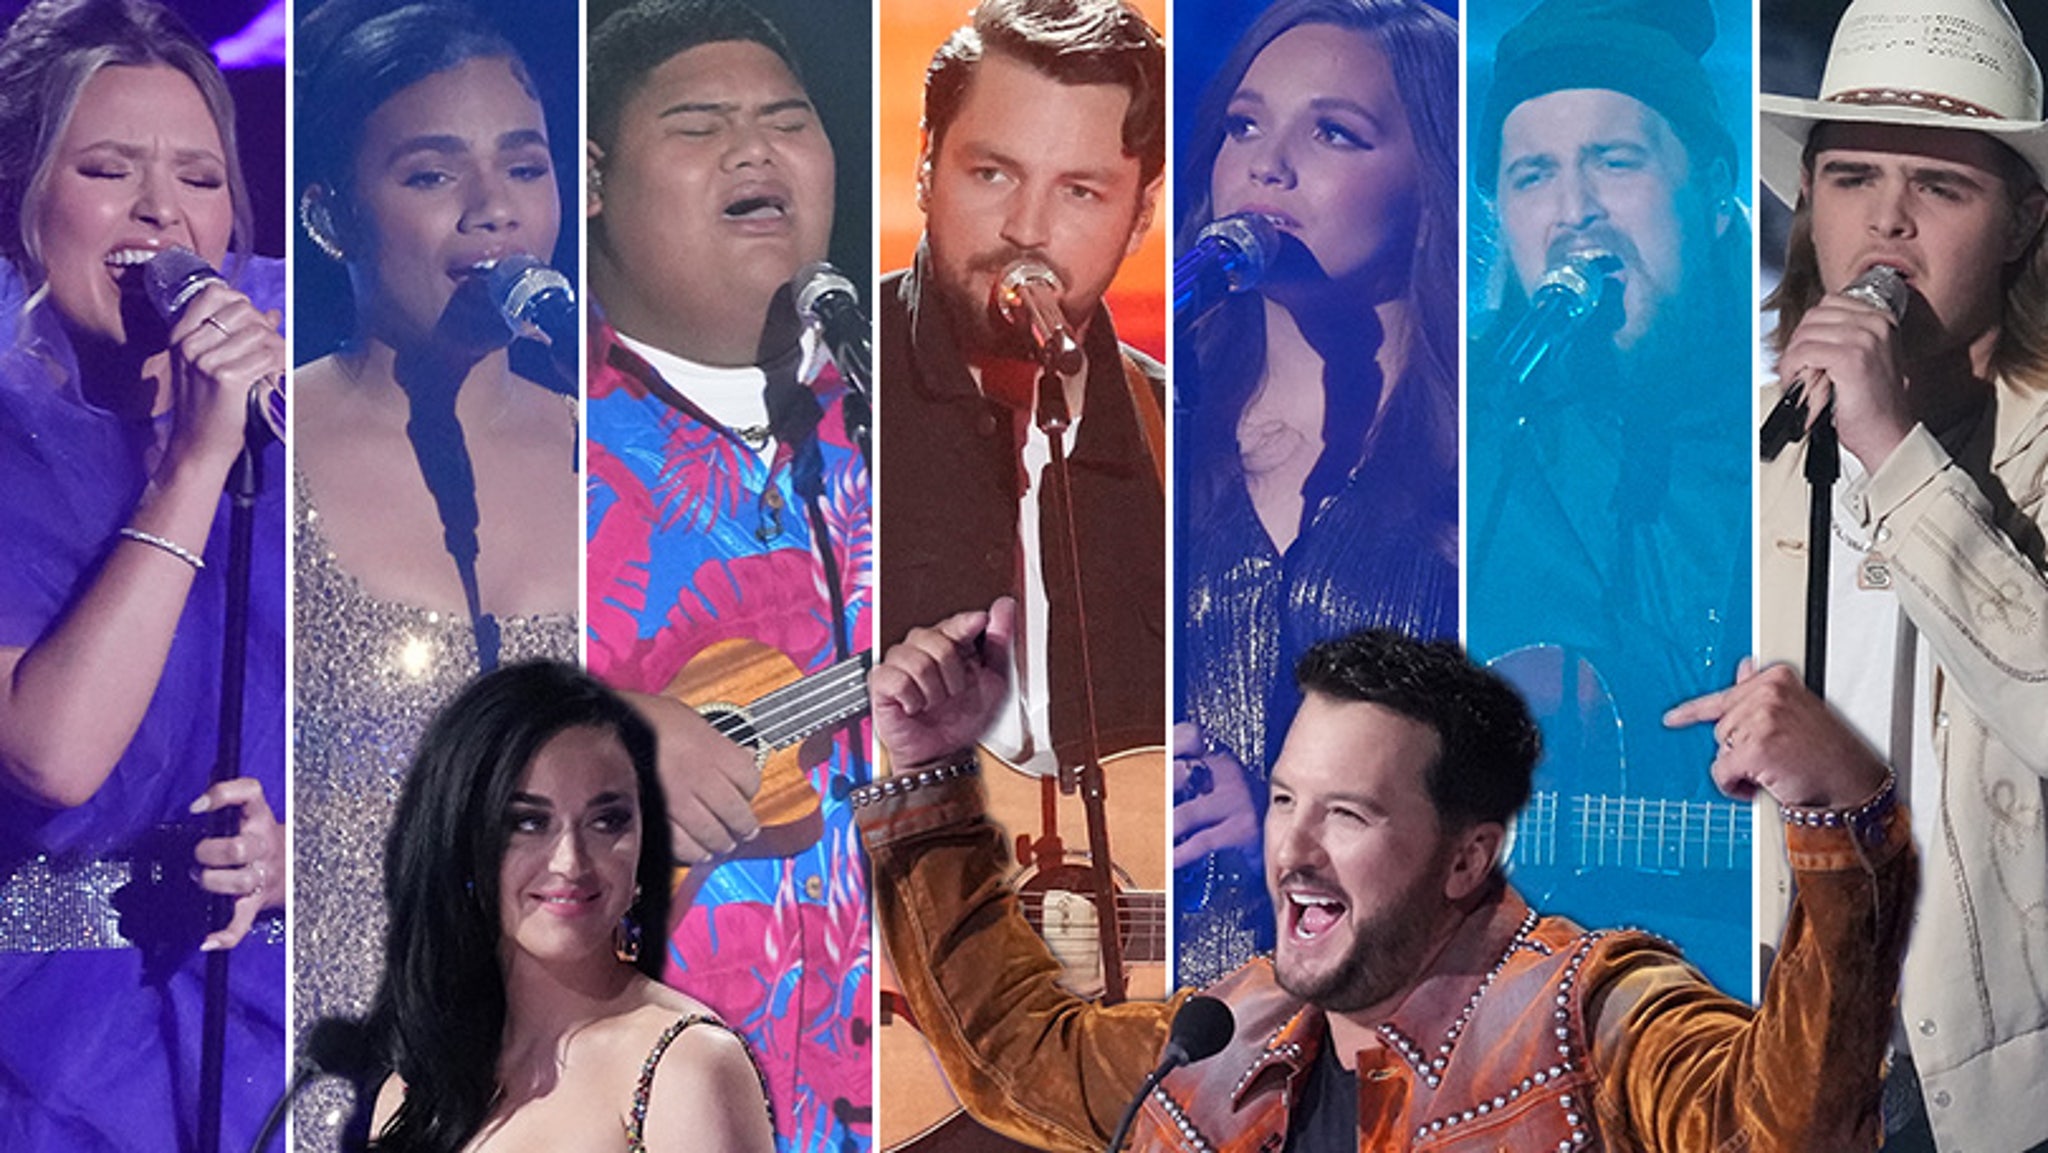 American Idol 5th Judge: Katy Perry Gets Lost, Luke Bryan Worries About HR After Off-Color Comment